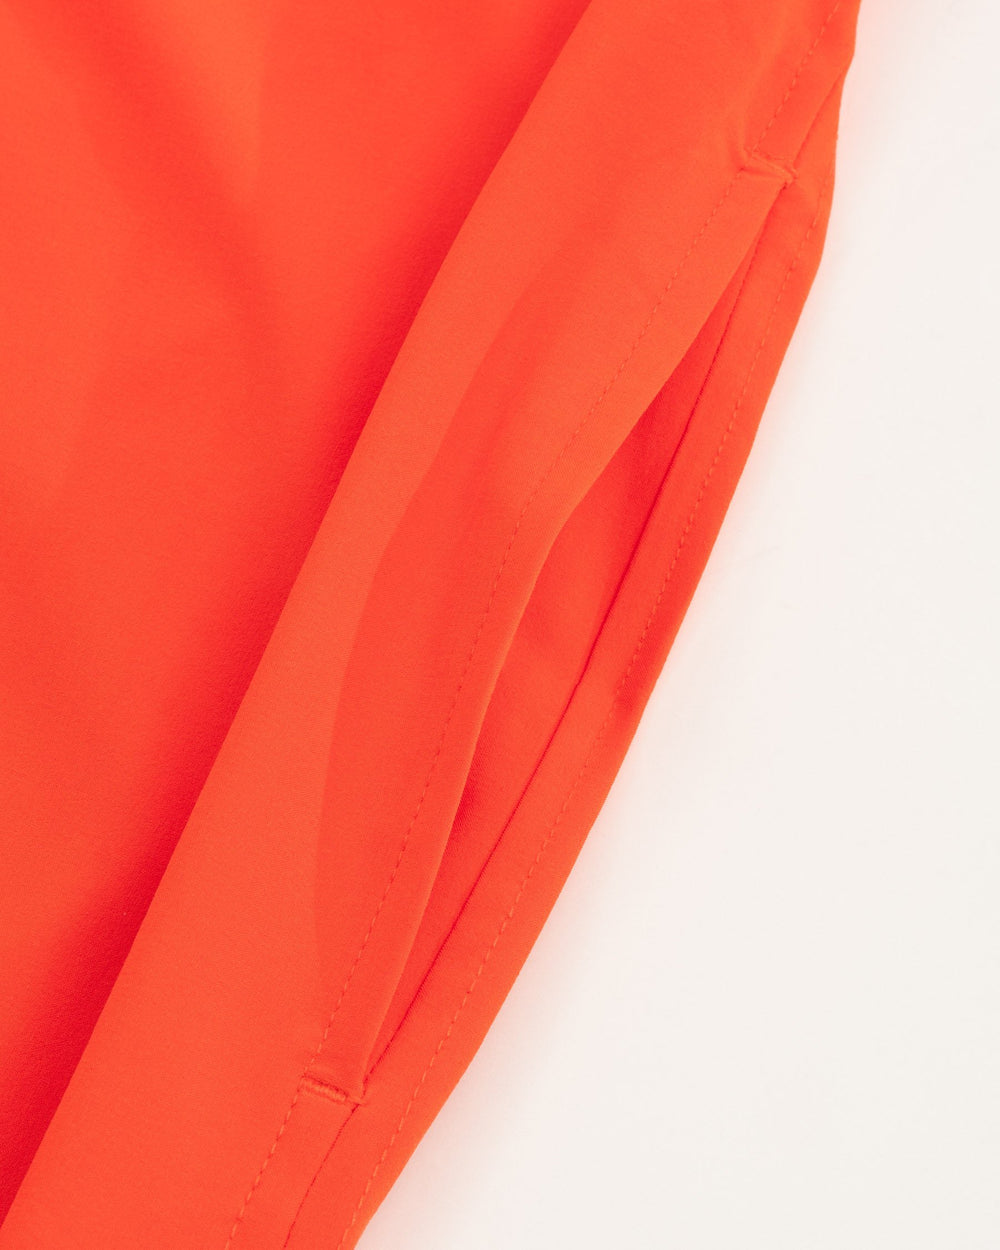 The pocket view of the Women's Orange Gameday Dress by Southern Tide - EndZone Orange